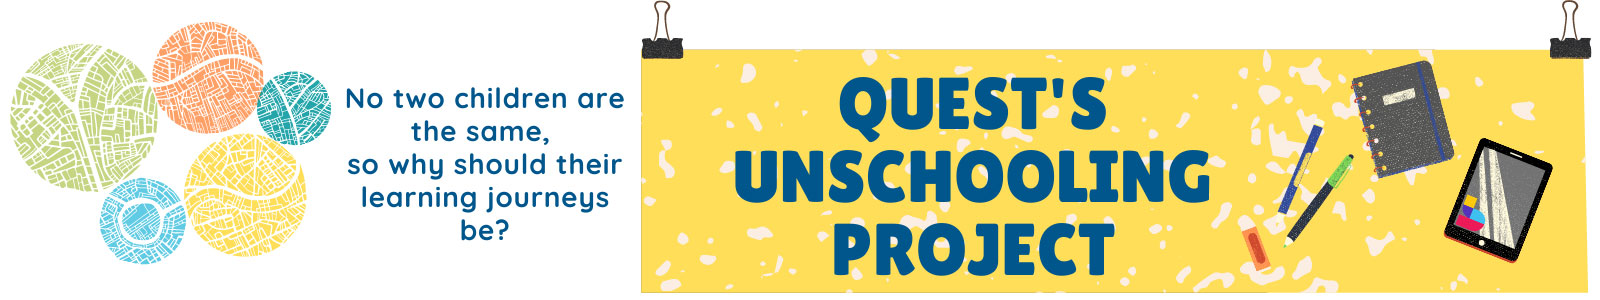 unschooling-project-header